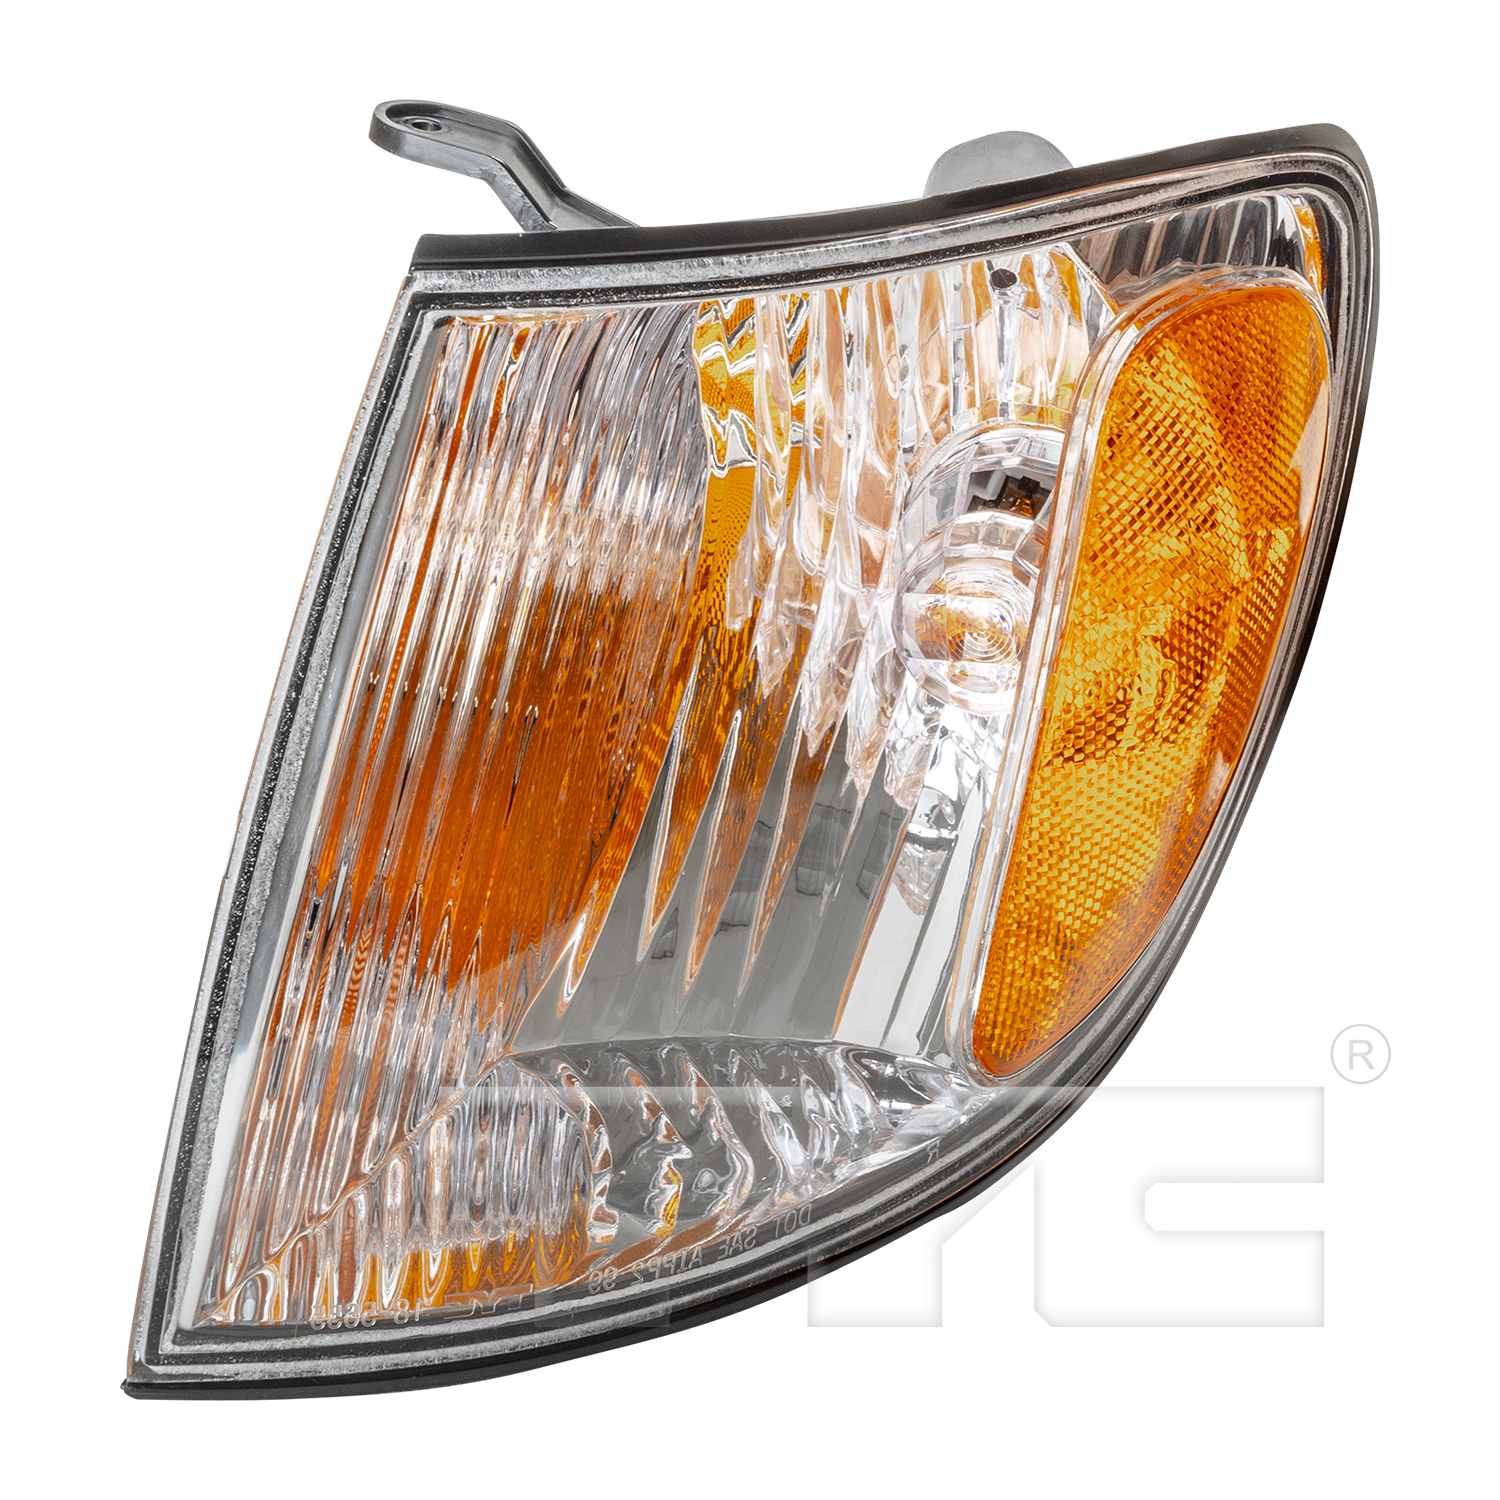 Aftermarket LAMPS for TOYOTA - SIENNA, SIENNA,01-03,LT Front signal lamp